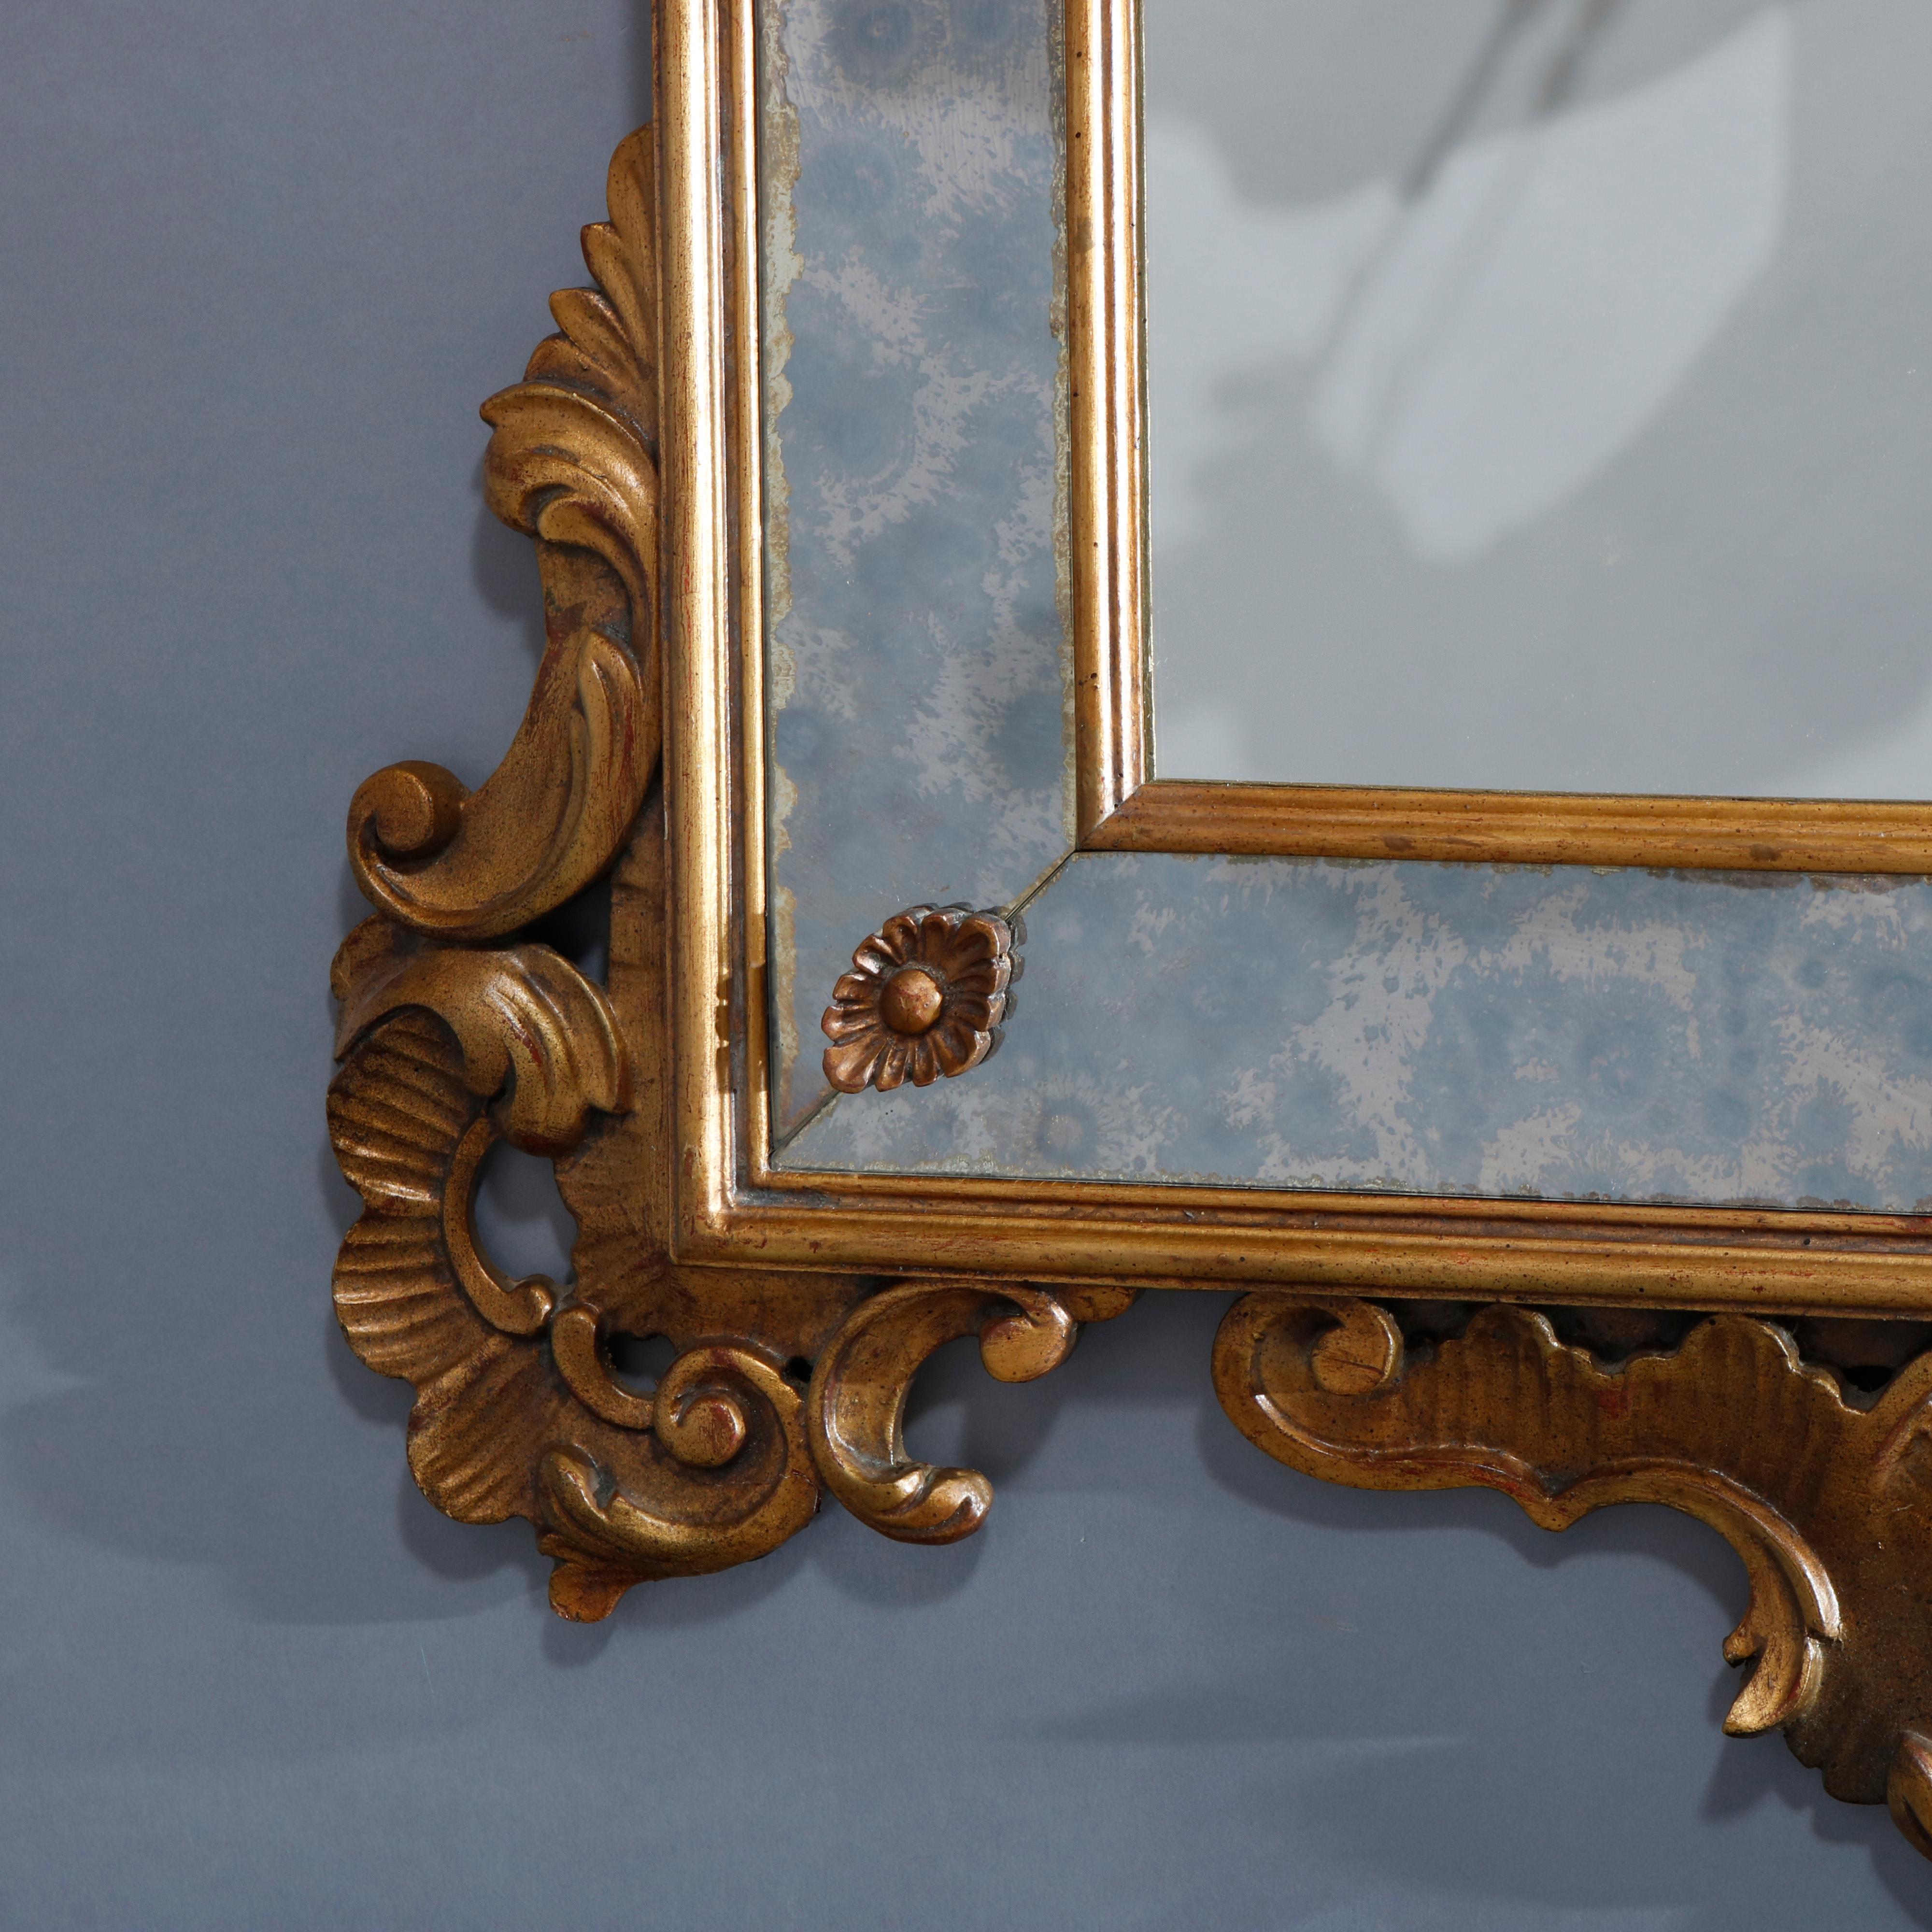 Vintage Italian Rococo Style Giltwood Parclose Over Mantel Mirror by Karges 8